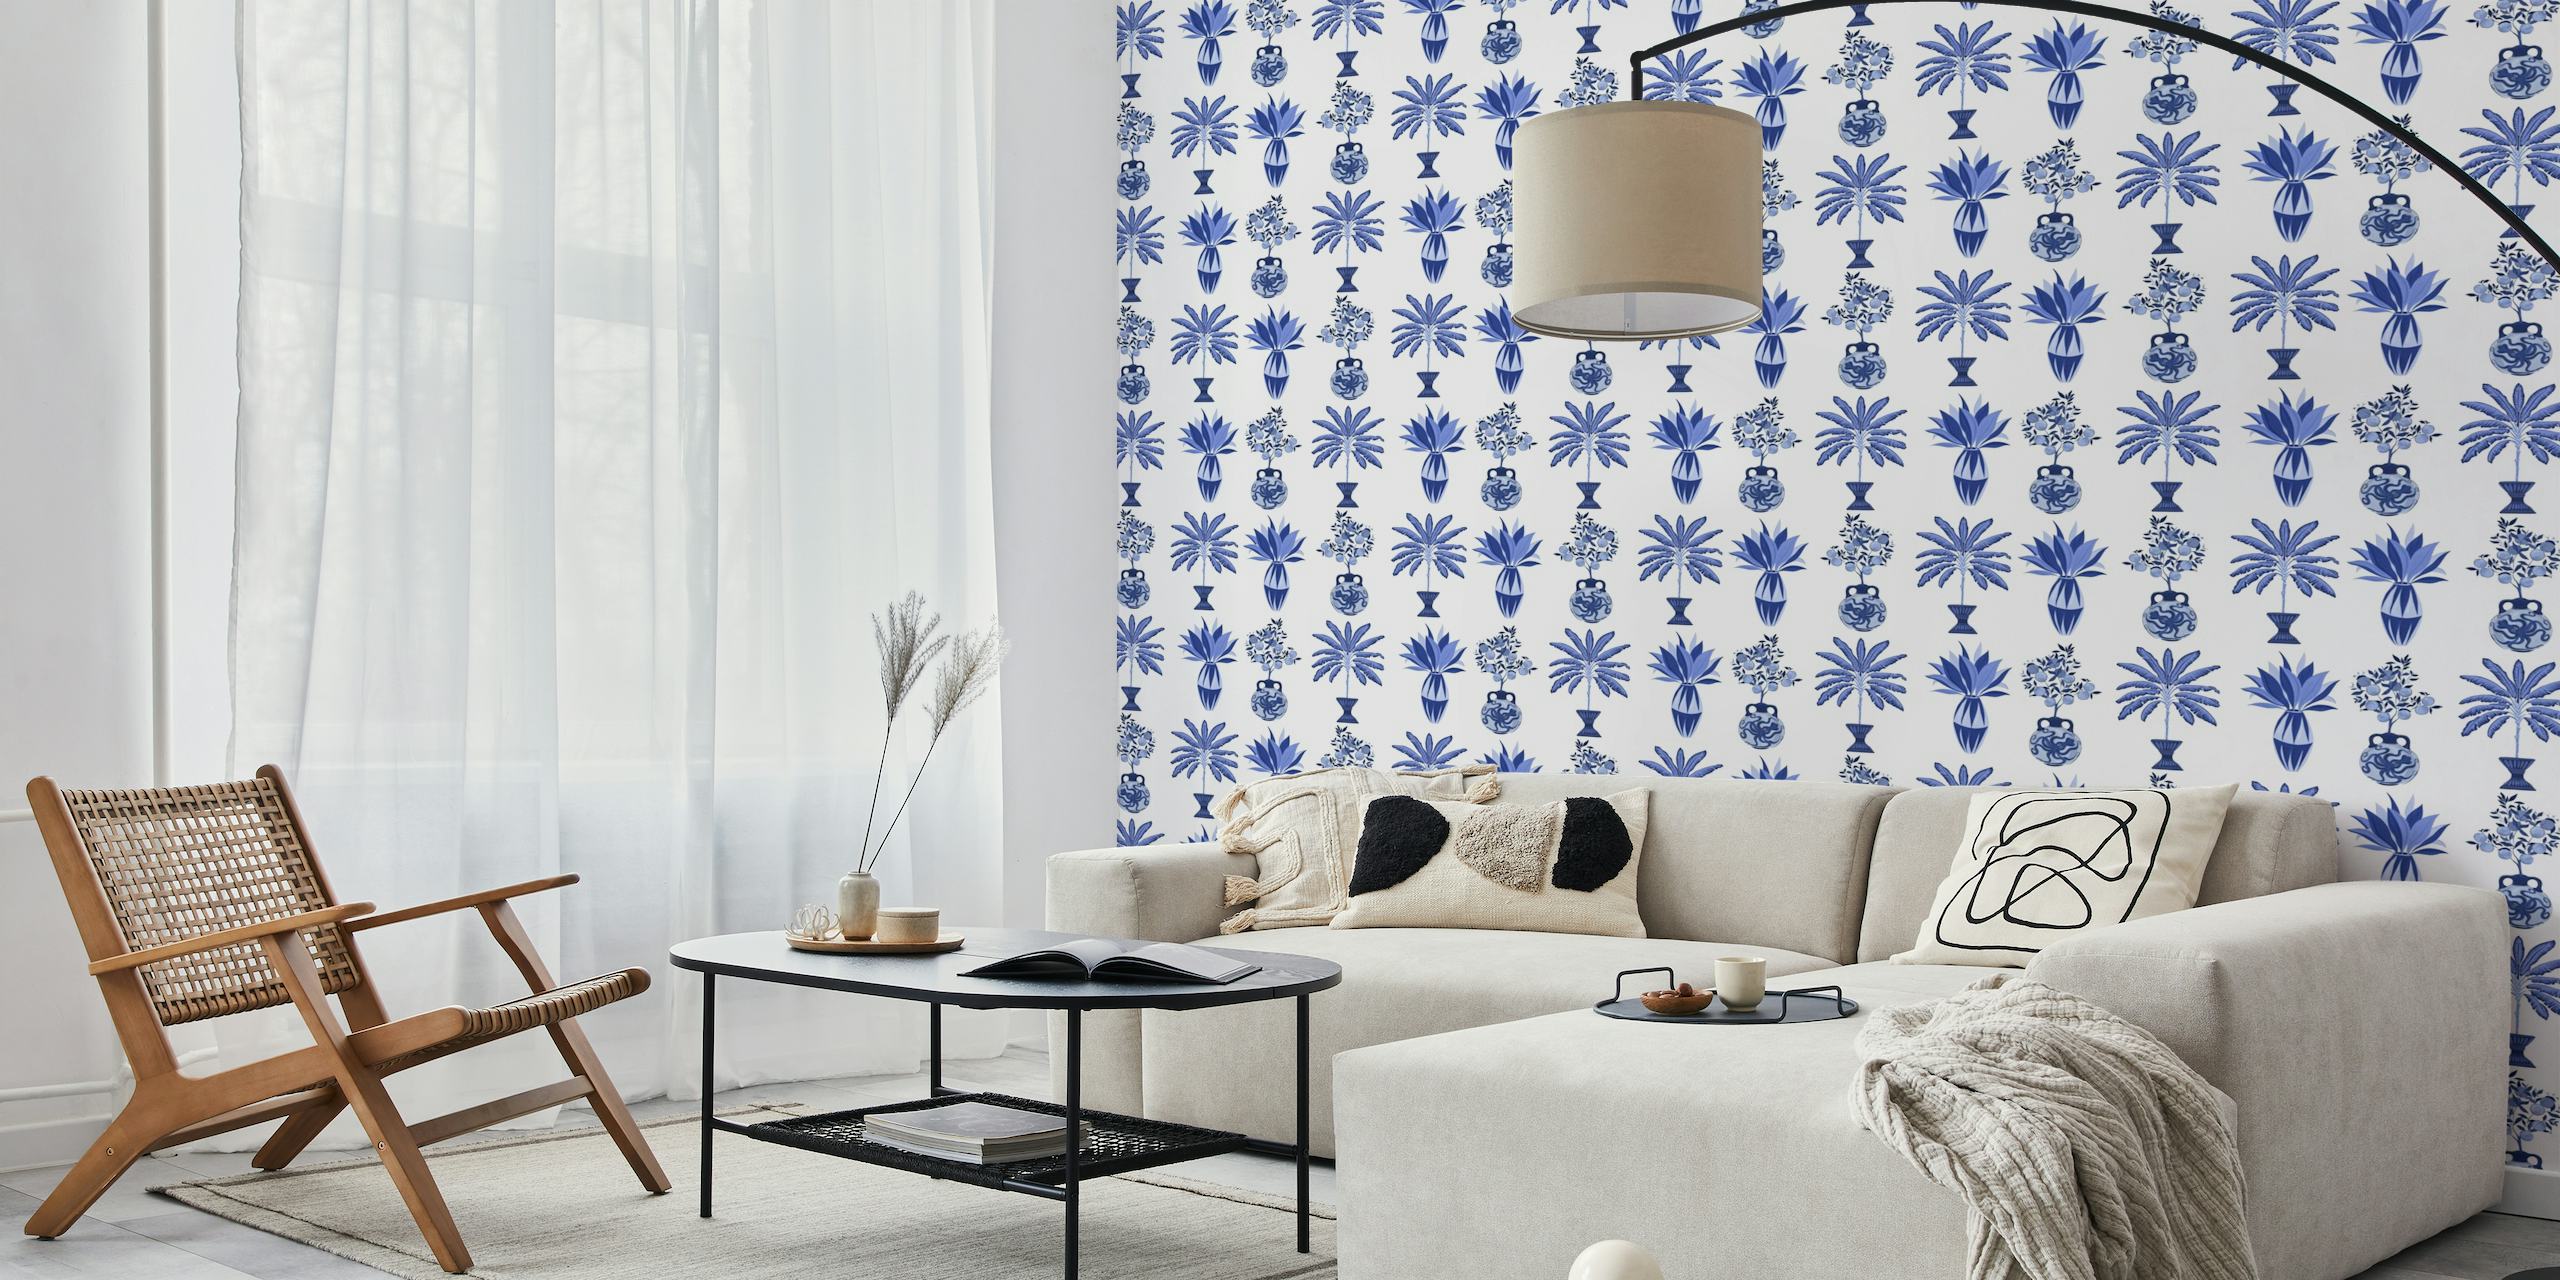 Blue and white Mediterranean Vases wall mural with botanical designs